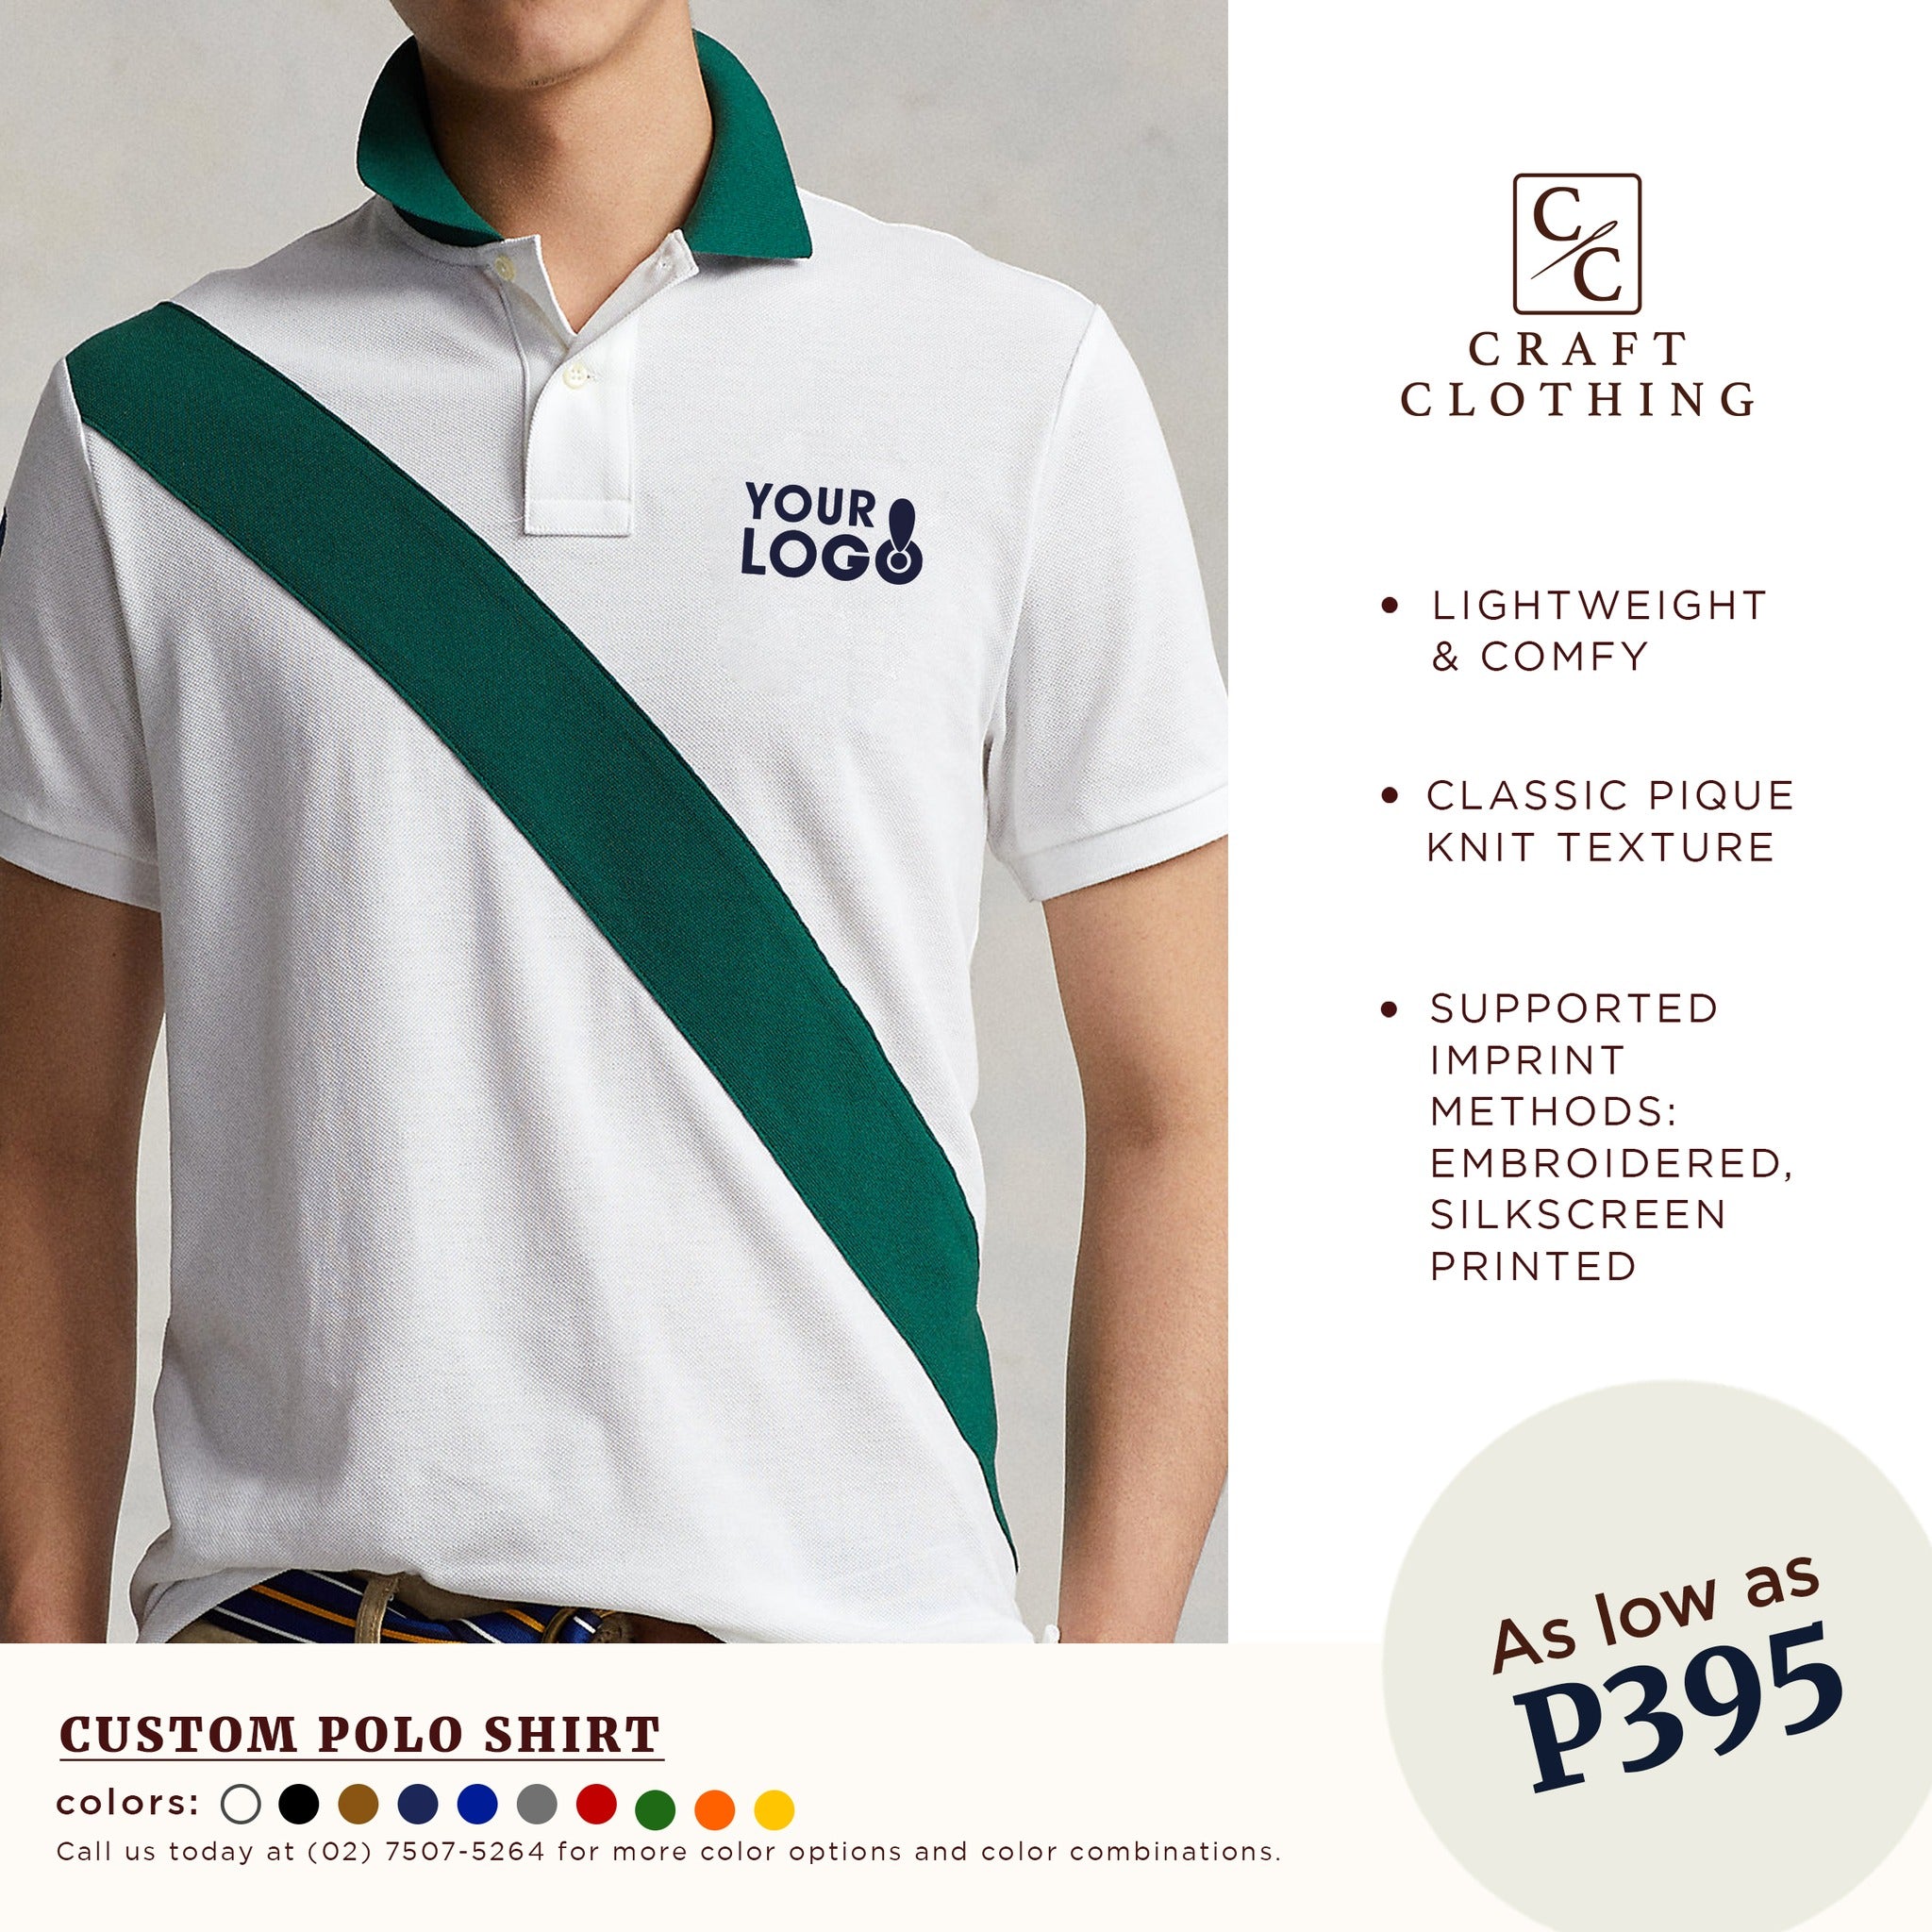 Polo Shirts never go out of style. – Craft Clothing